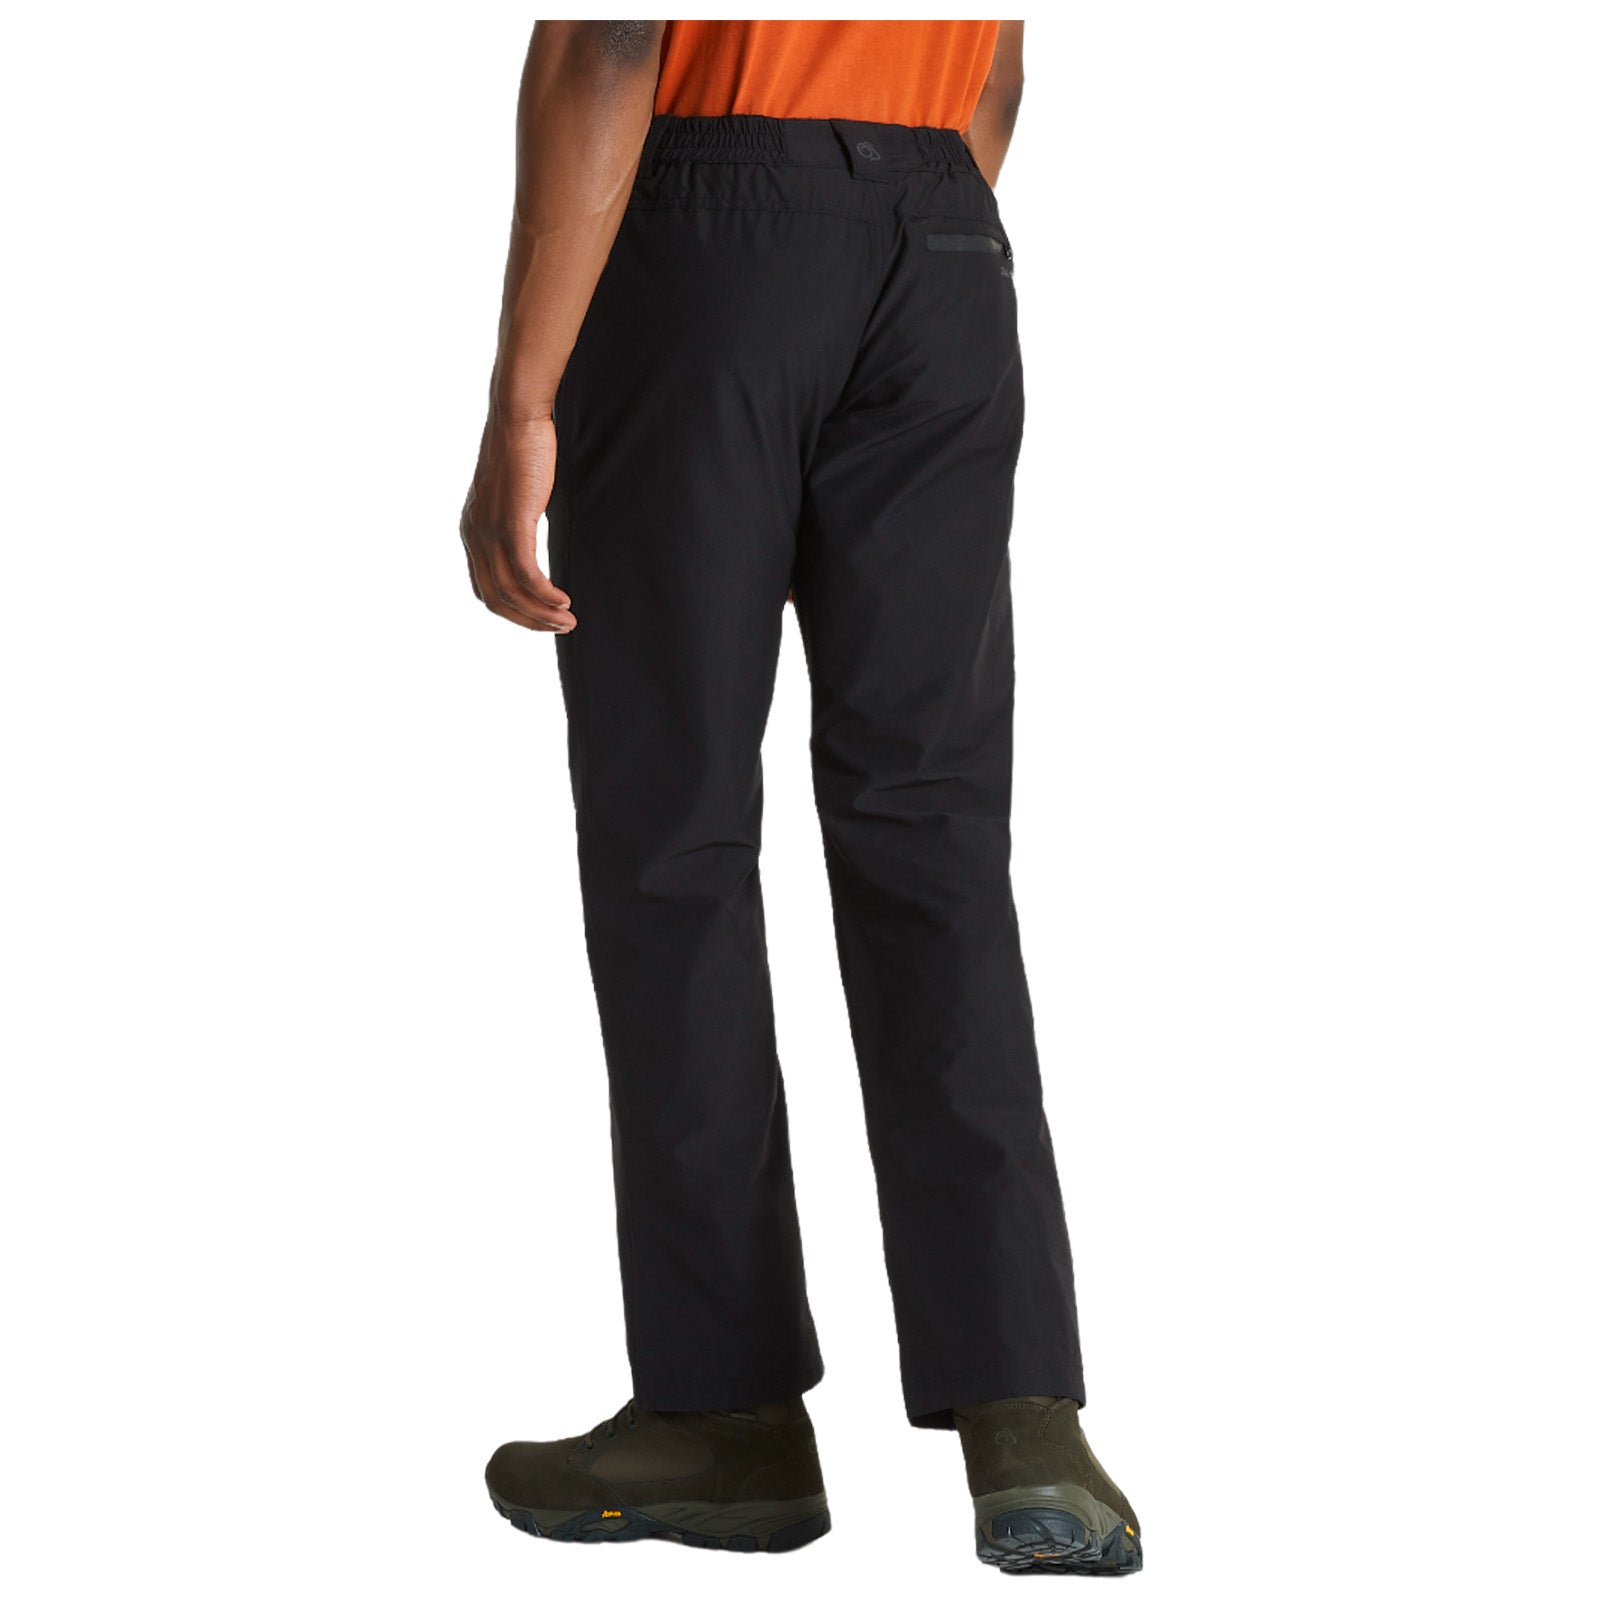 Craghoppers Ascent Overtrousers review | Advnture